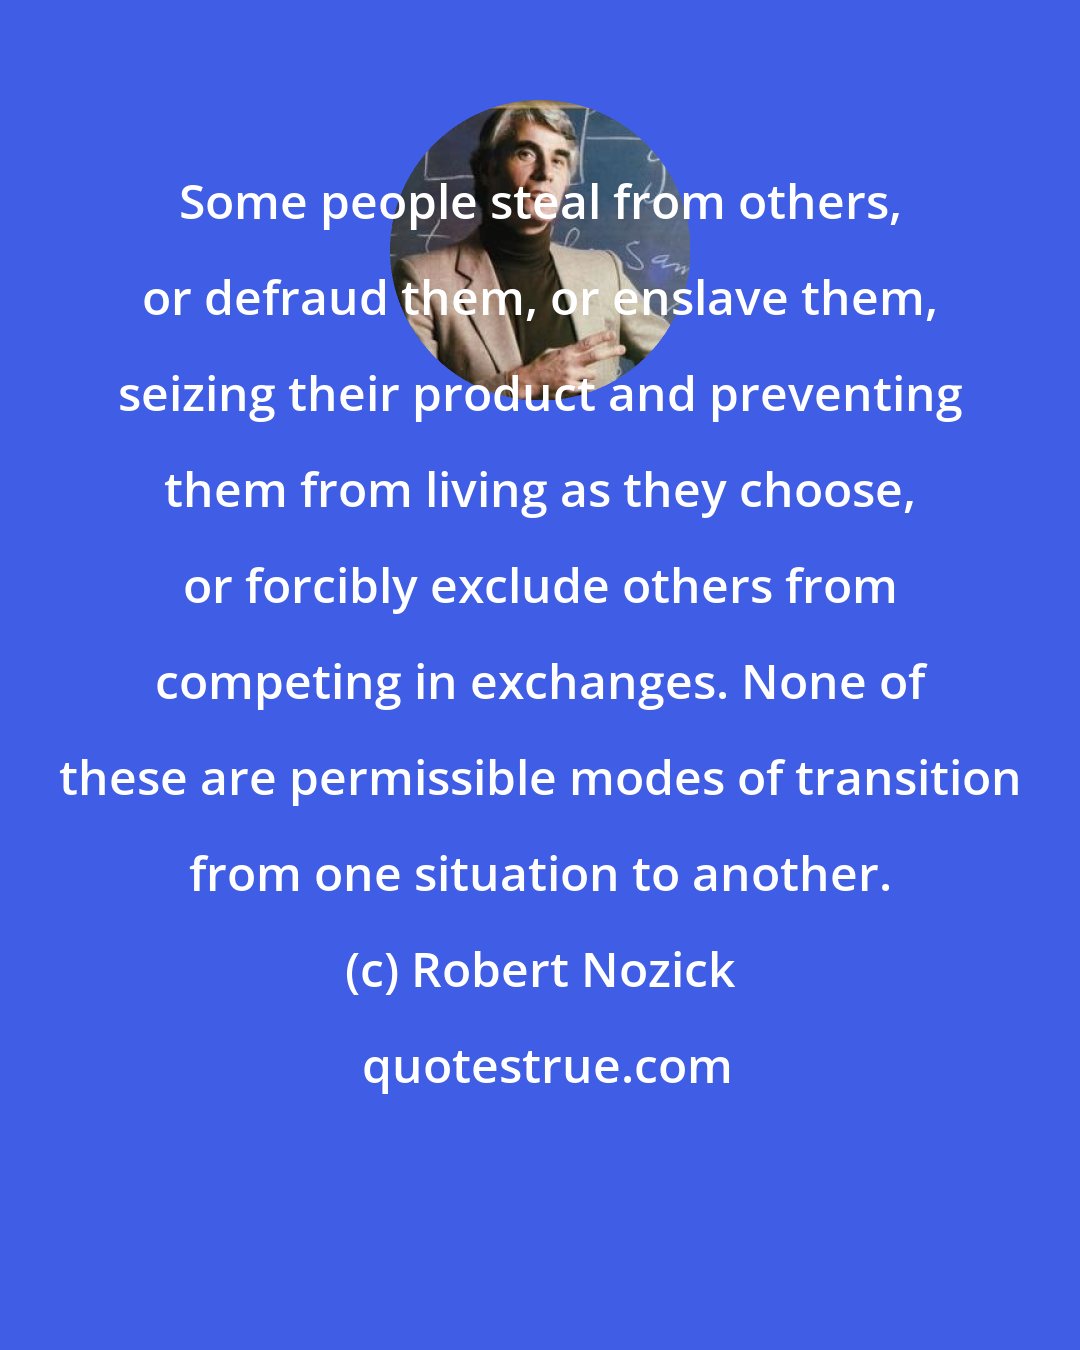 Robert Nozick: Some people steal from others, or defraud them, or enslave them, seizing their product and preventing them from living as they choose, or forcibly exclude others from competing in exchanges. None of these are permissible modes of transition from one situation to another.